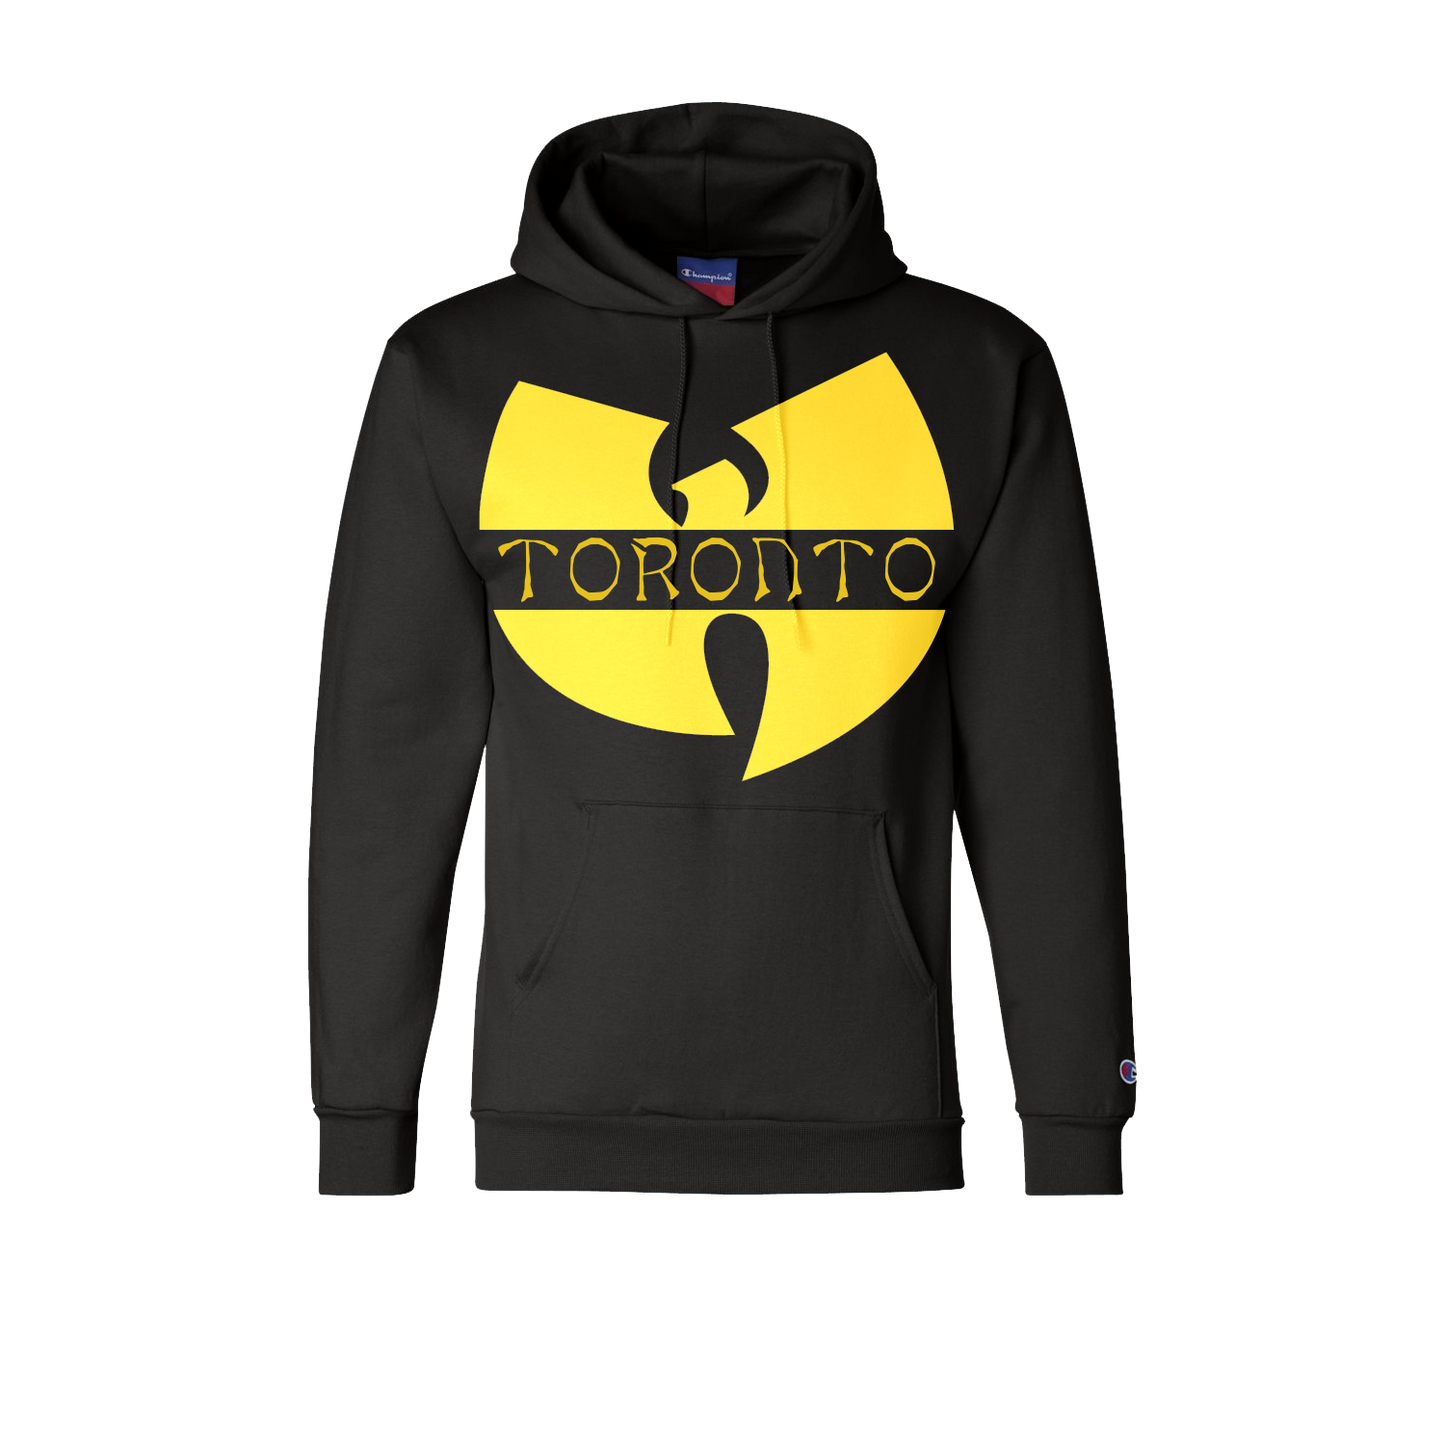 Toronto Tribute Champion Hoodie with Wu-Tang Inspired - Pullover Hoodie